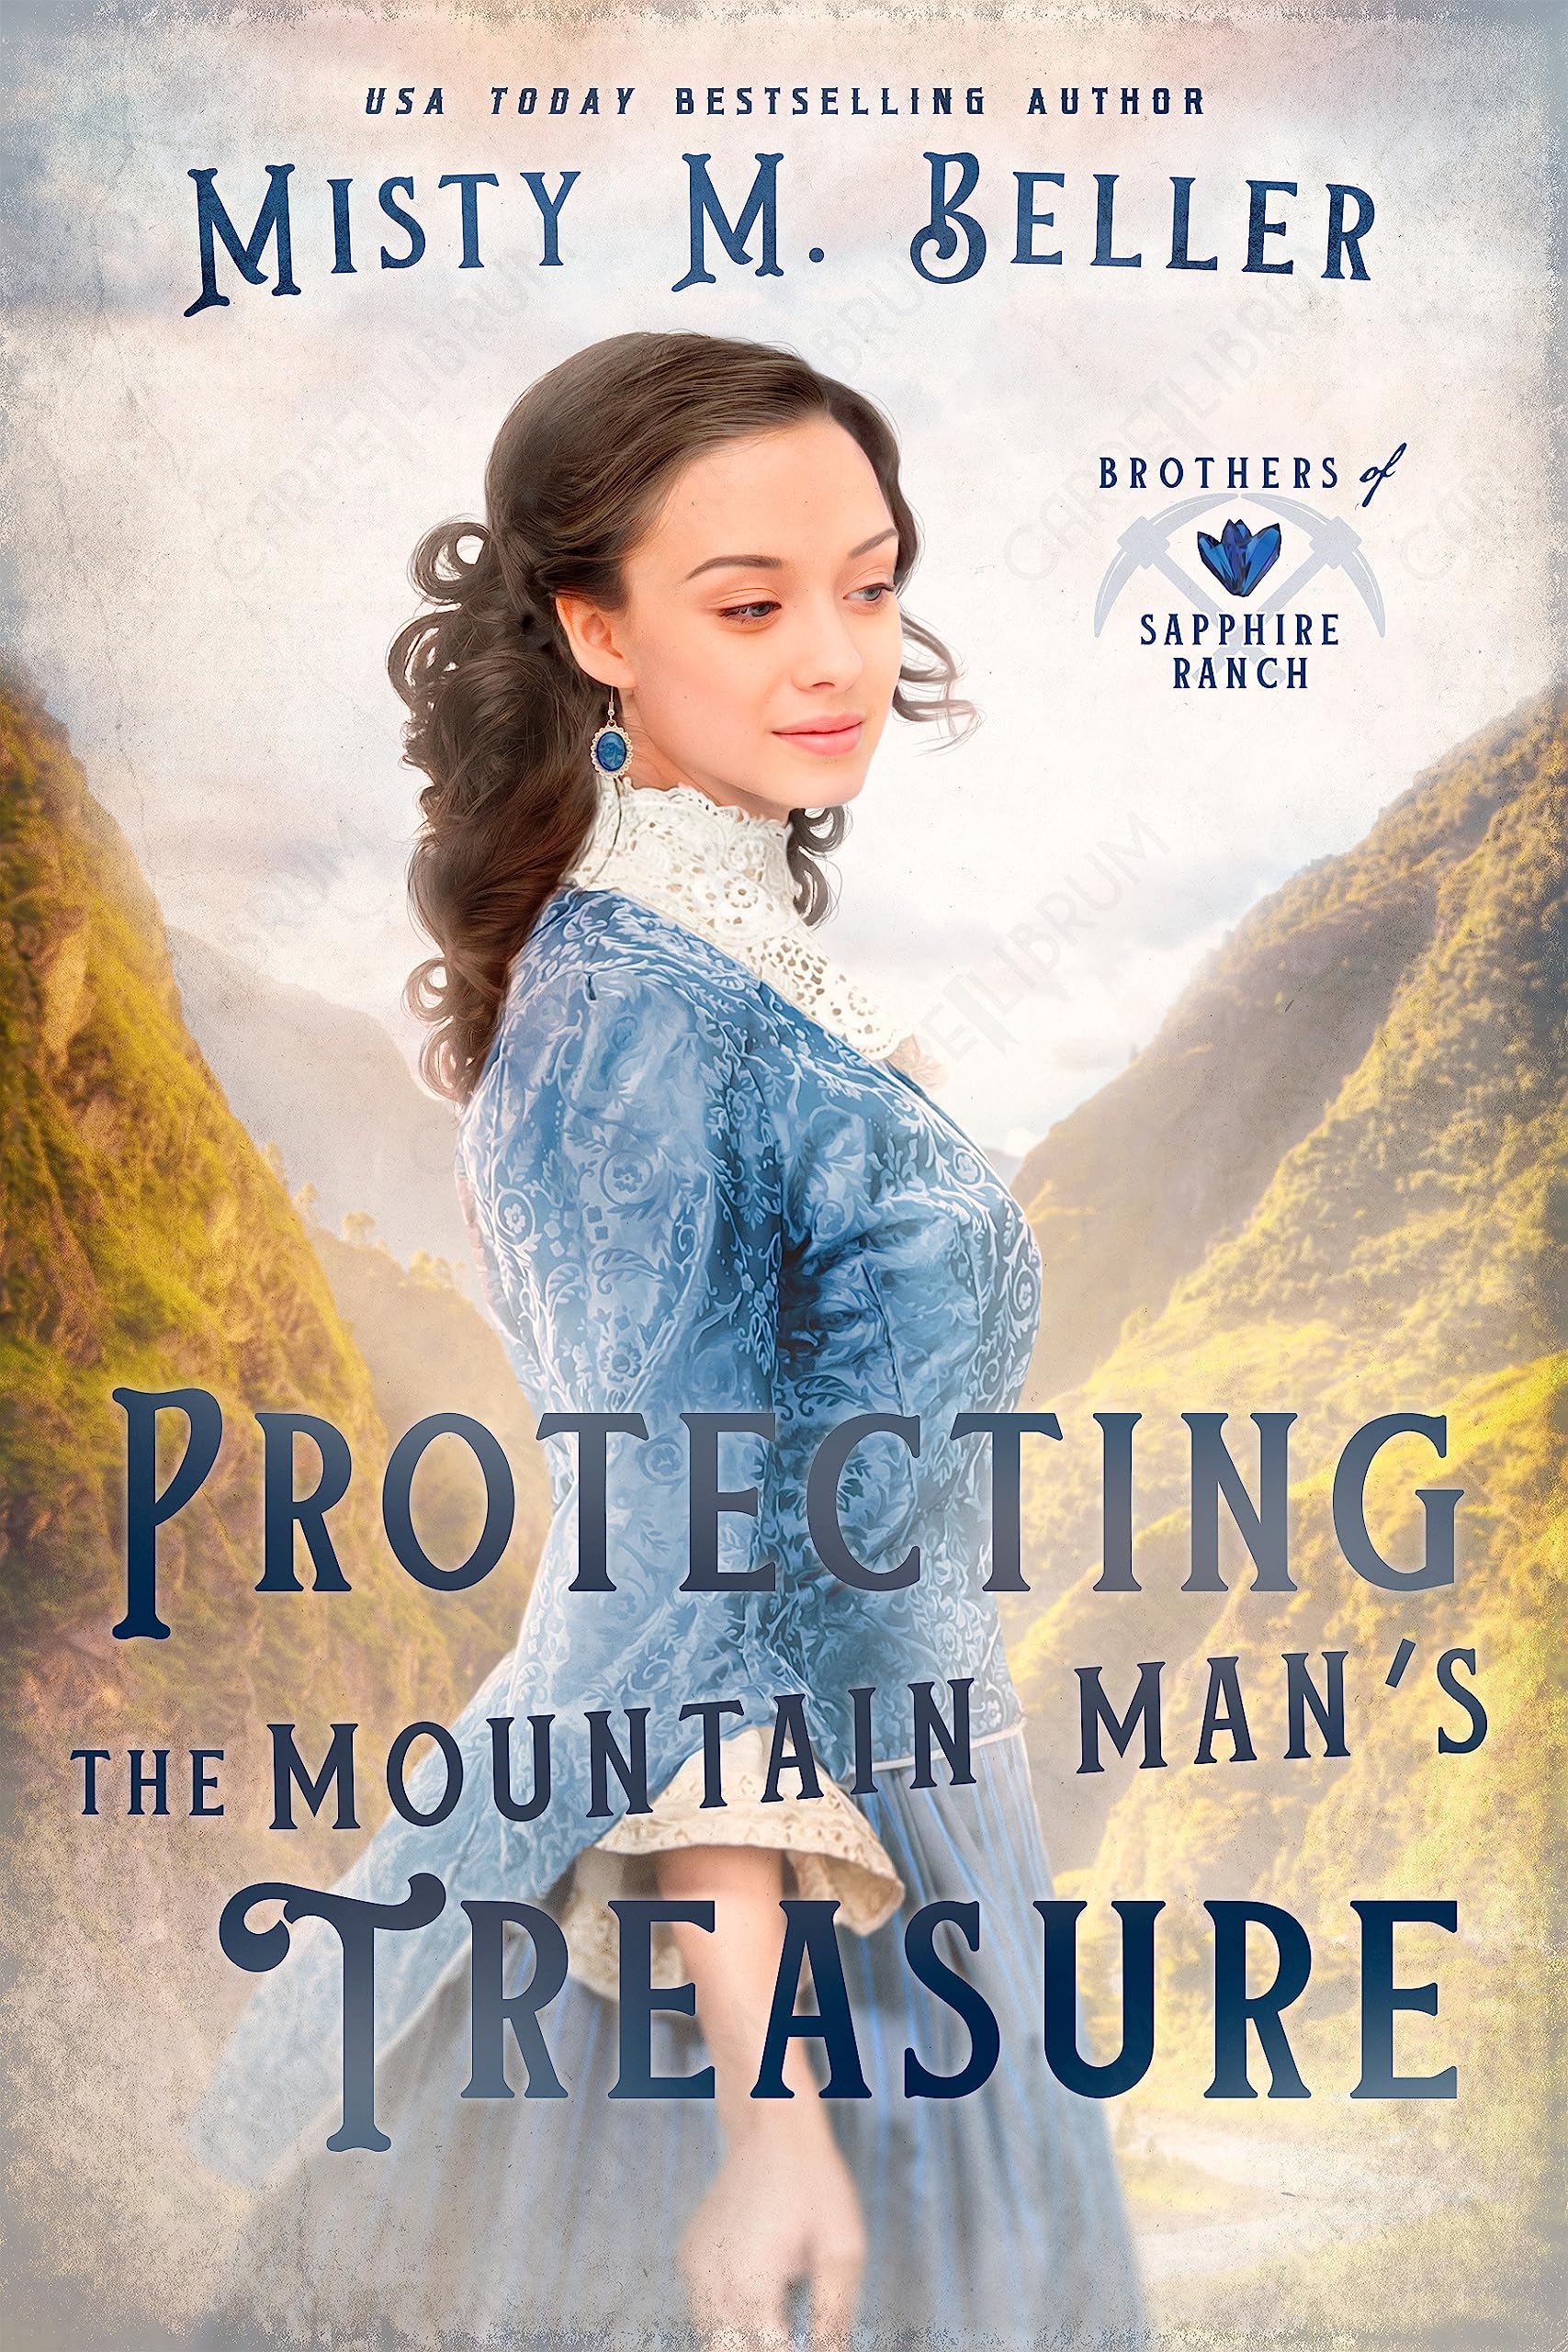 Protecting the Mountain Man's Treasure (Brothers of Sapphire Ranch Book 2)